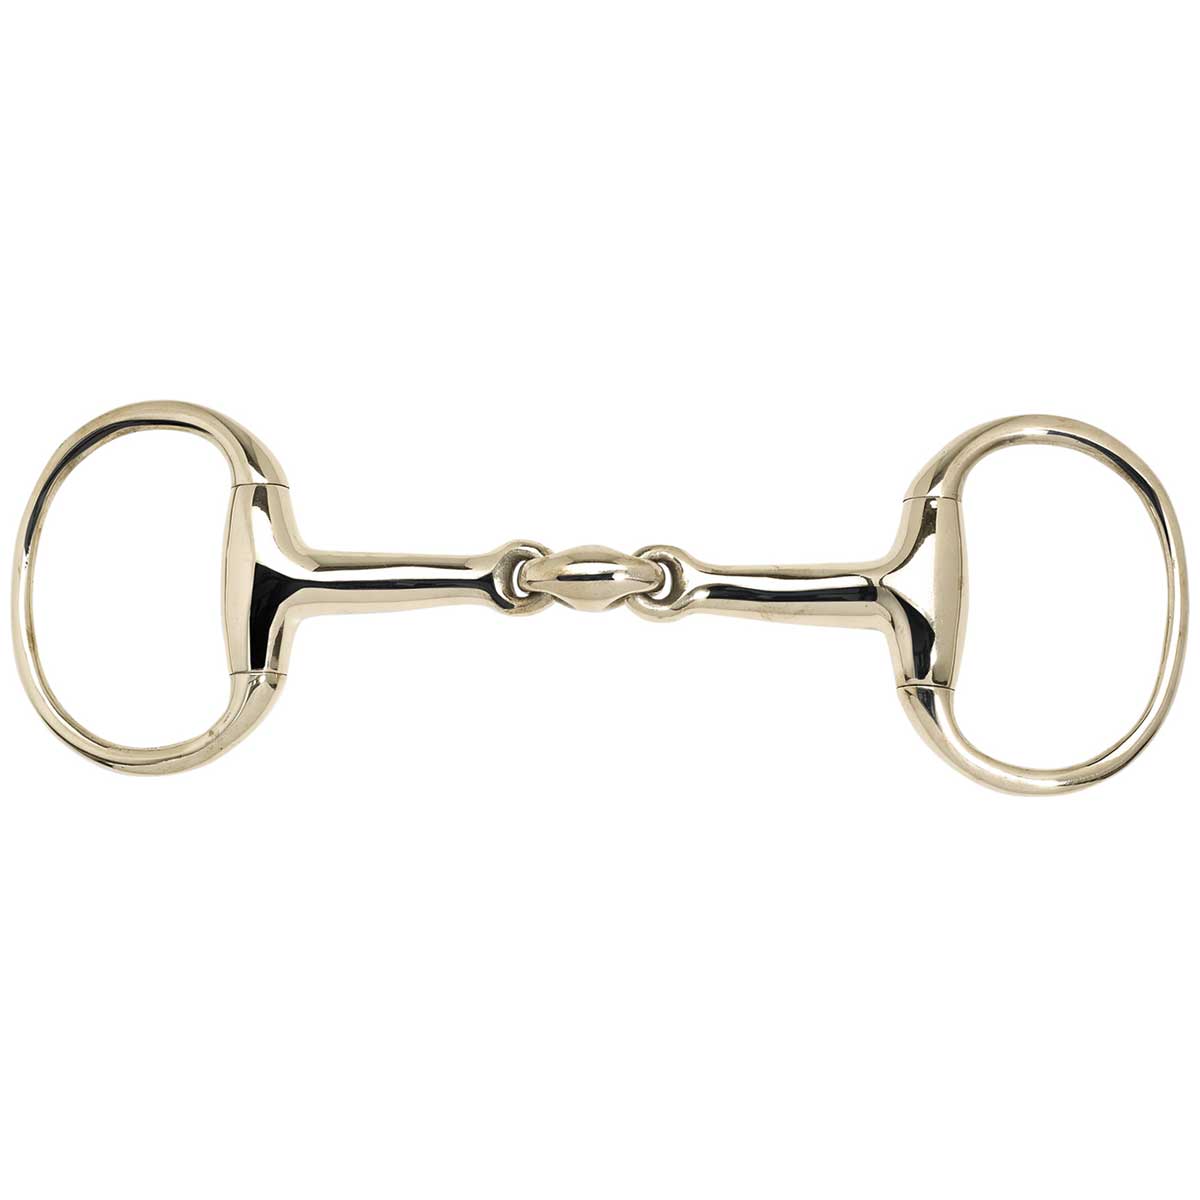 BUSSE Eggbutt Snaffle KAUGAN®, French-link, thin